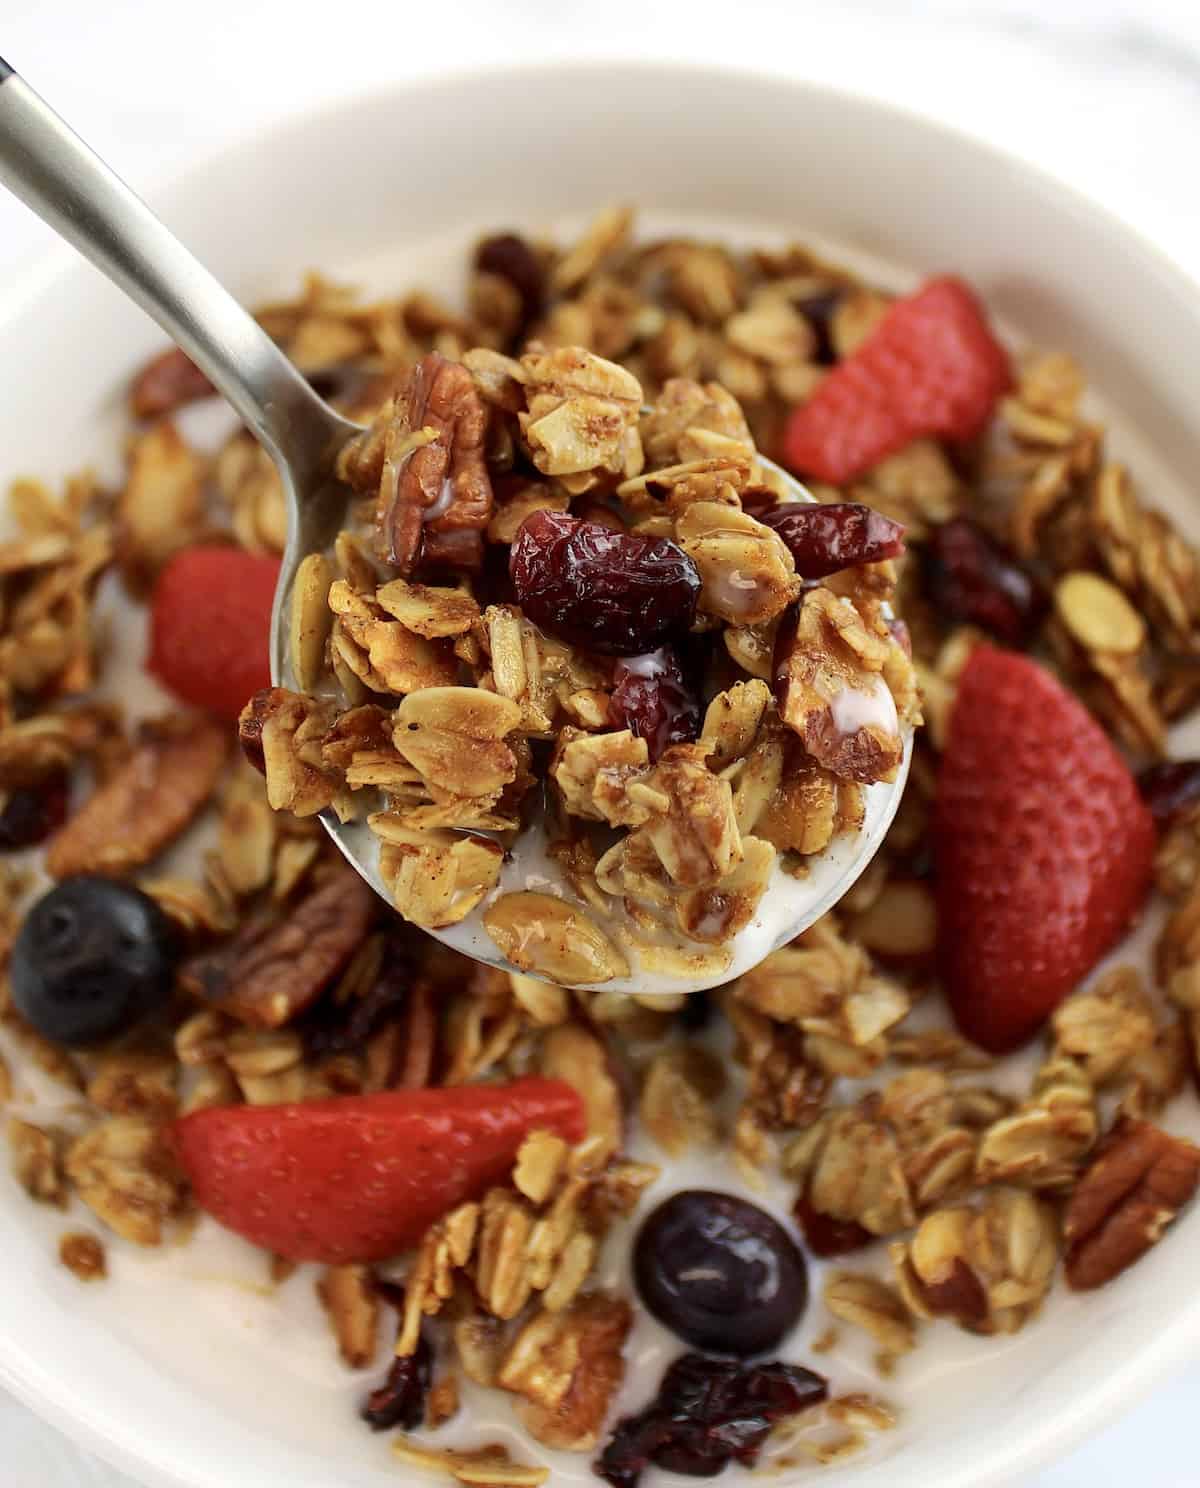 Homemade Granola cereal being spooned over bowl